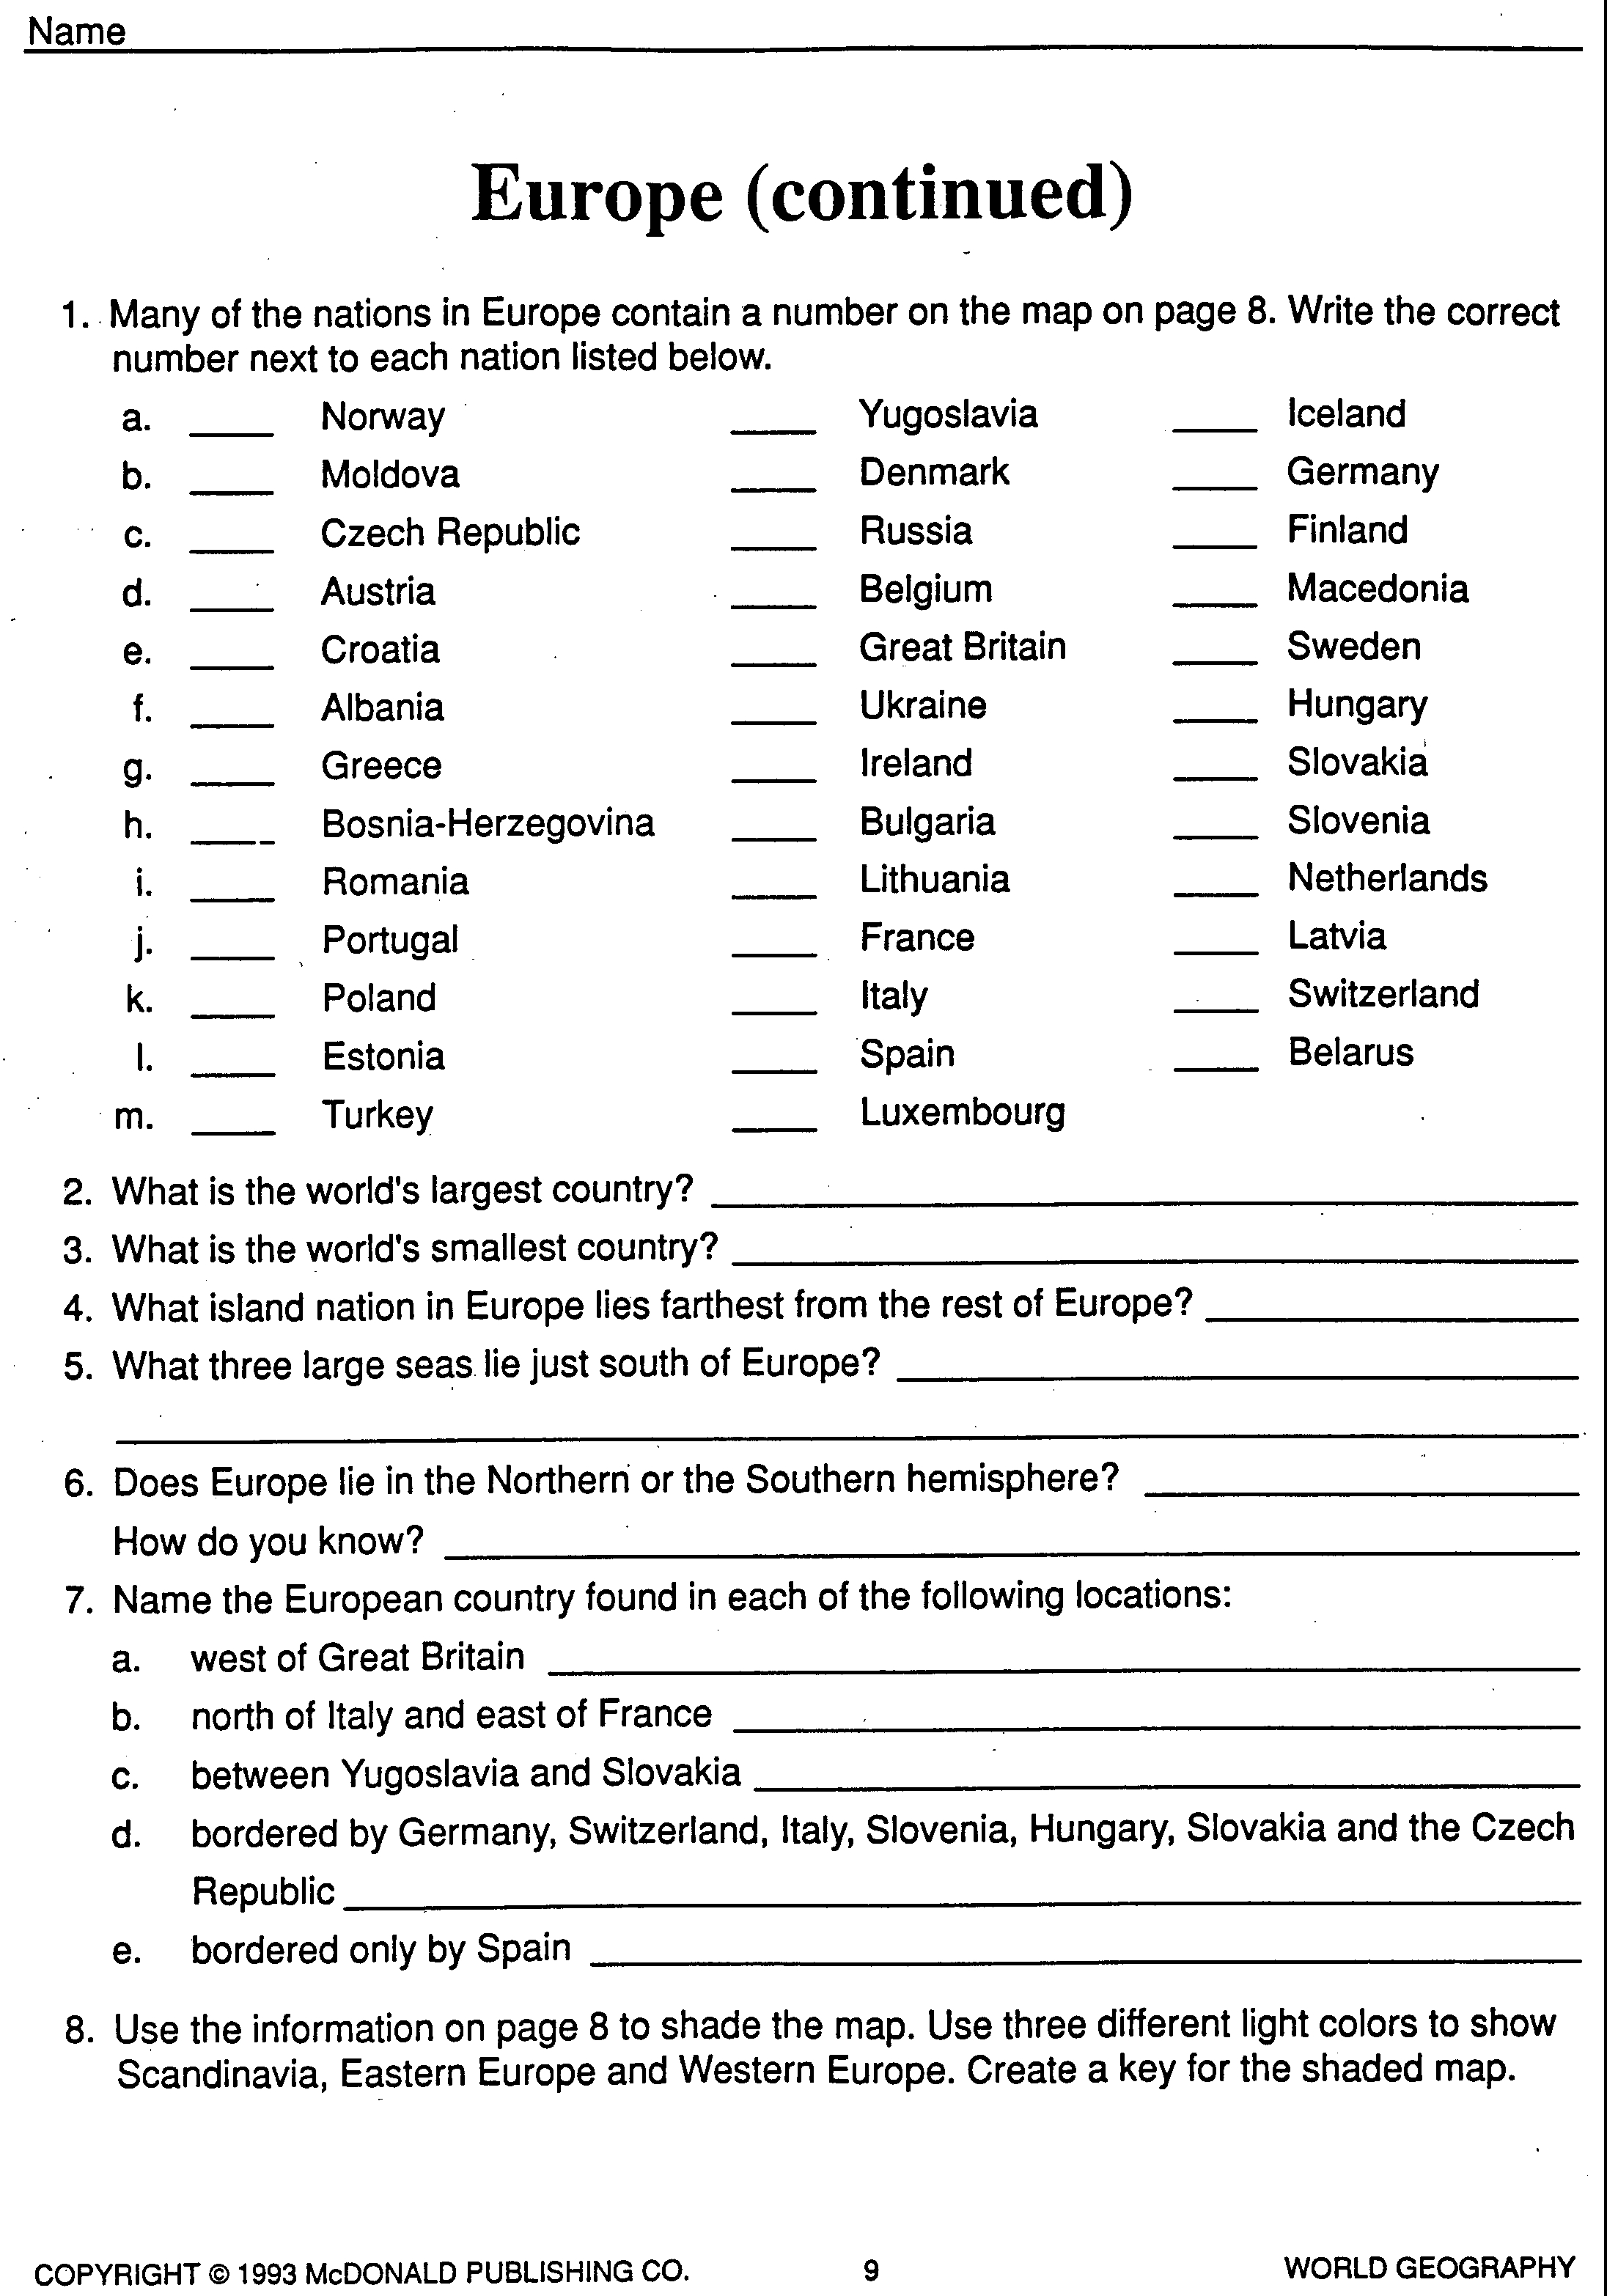 14 Best Images of Countries Of The World Worksheet - World Map